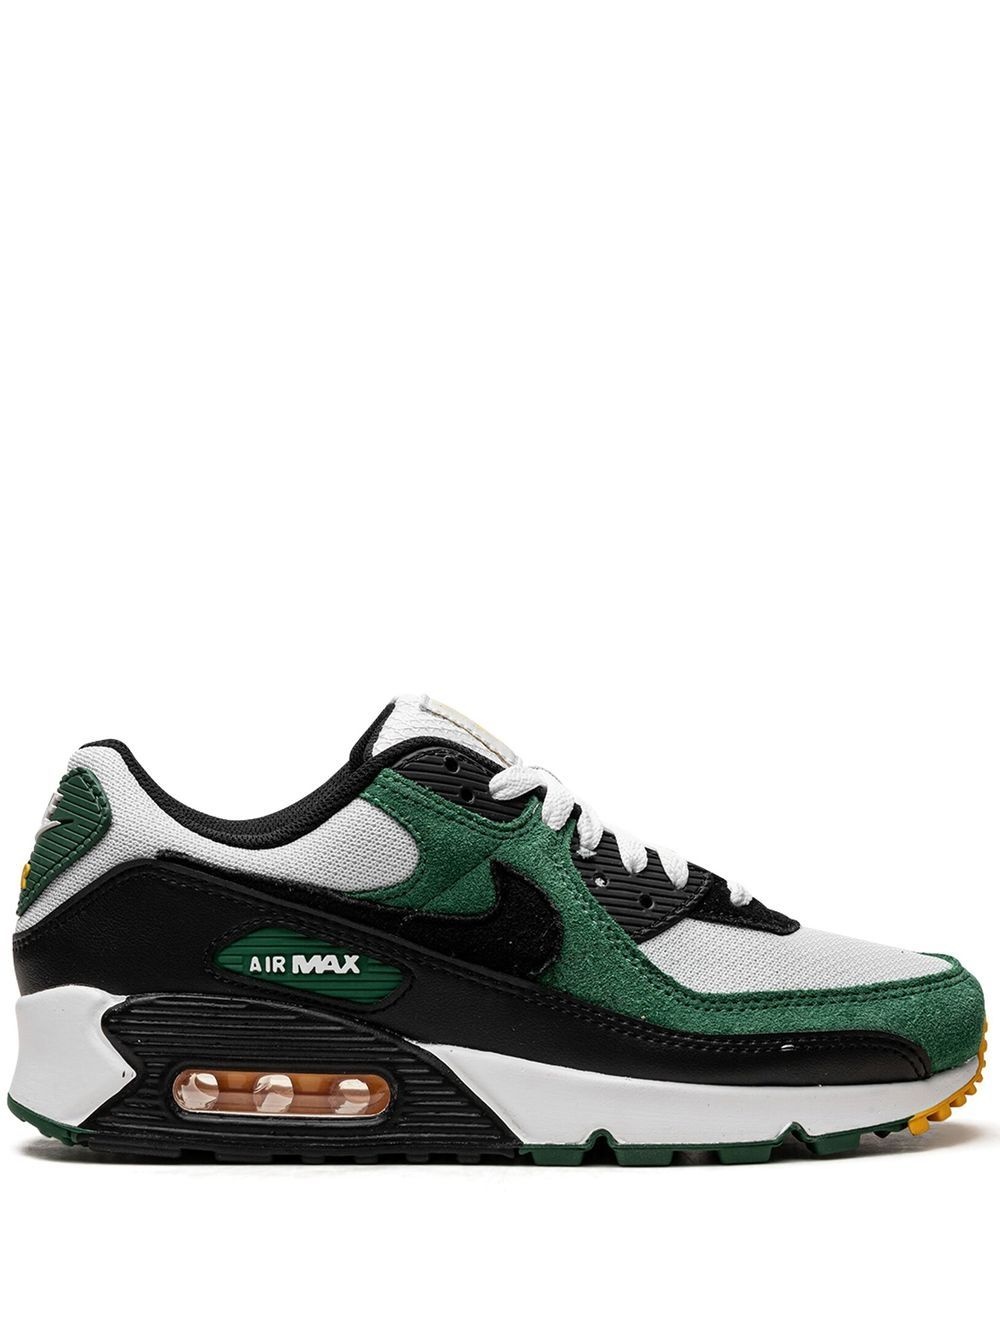 Air Max 90 ''Gorge Green'' sneakers - 1